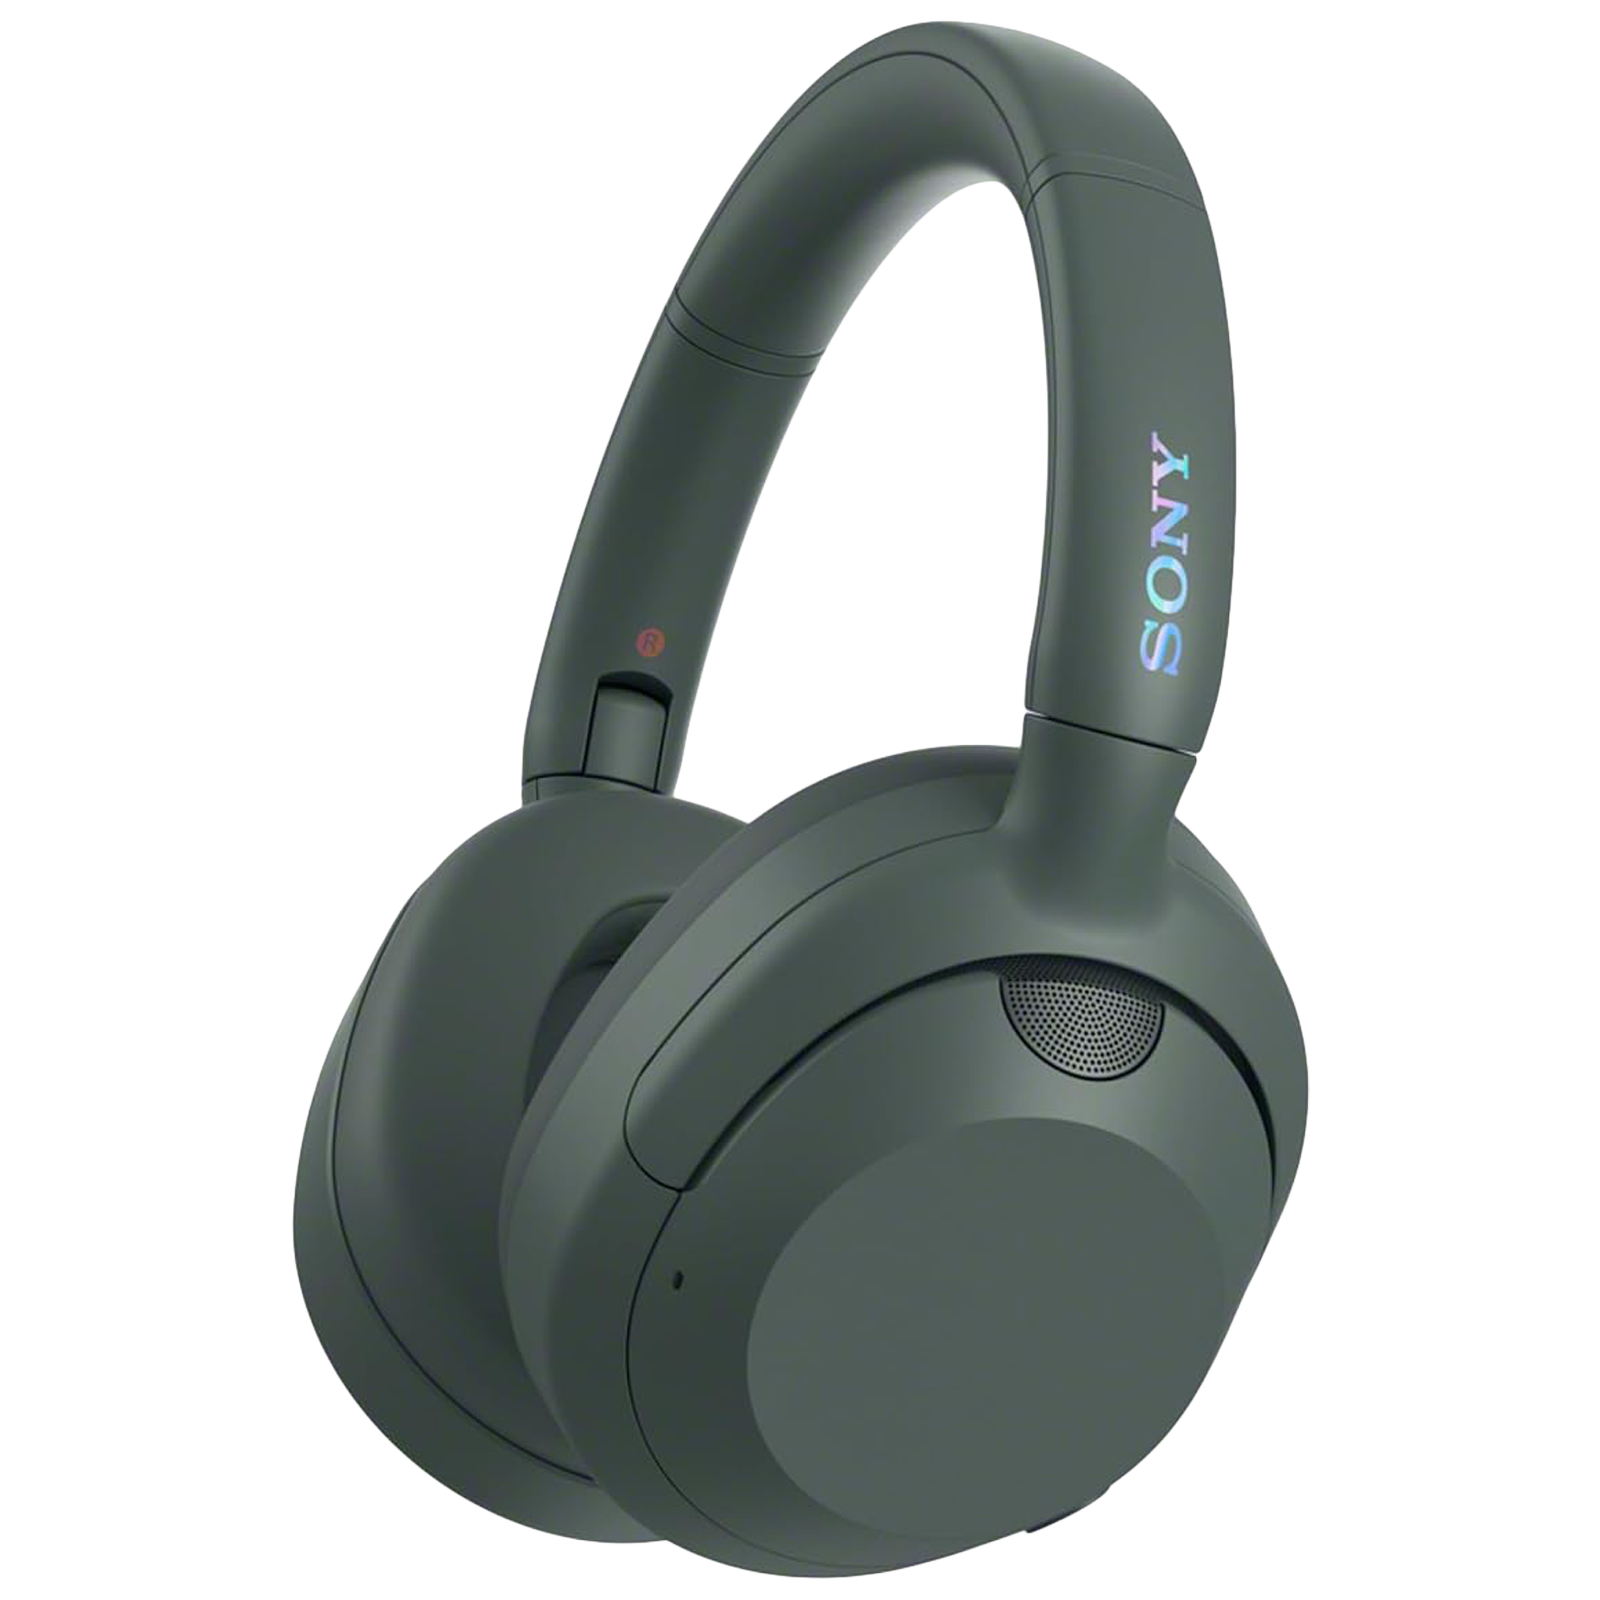 SONY ULT WEAR WH-ULT900N Bluetooth Headset with Mic (40 mm Neodymium Drivers, Over-Ear, Forest Grey)